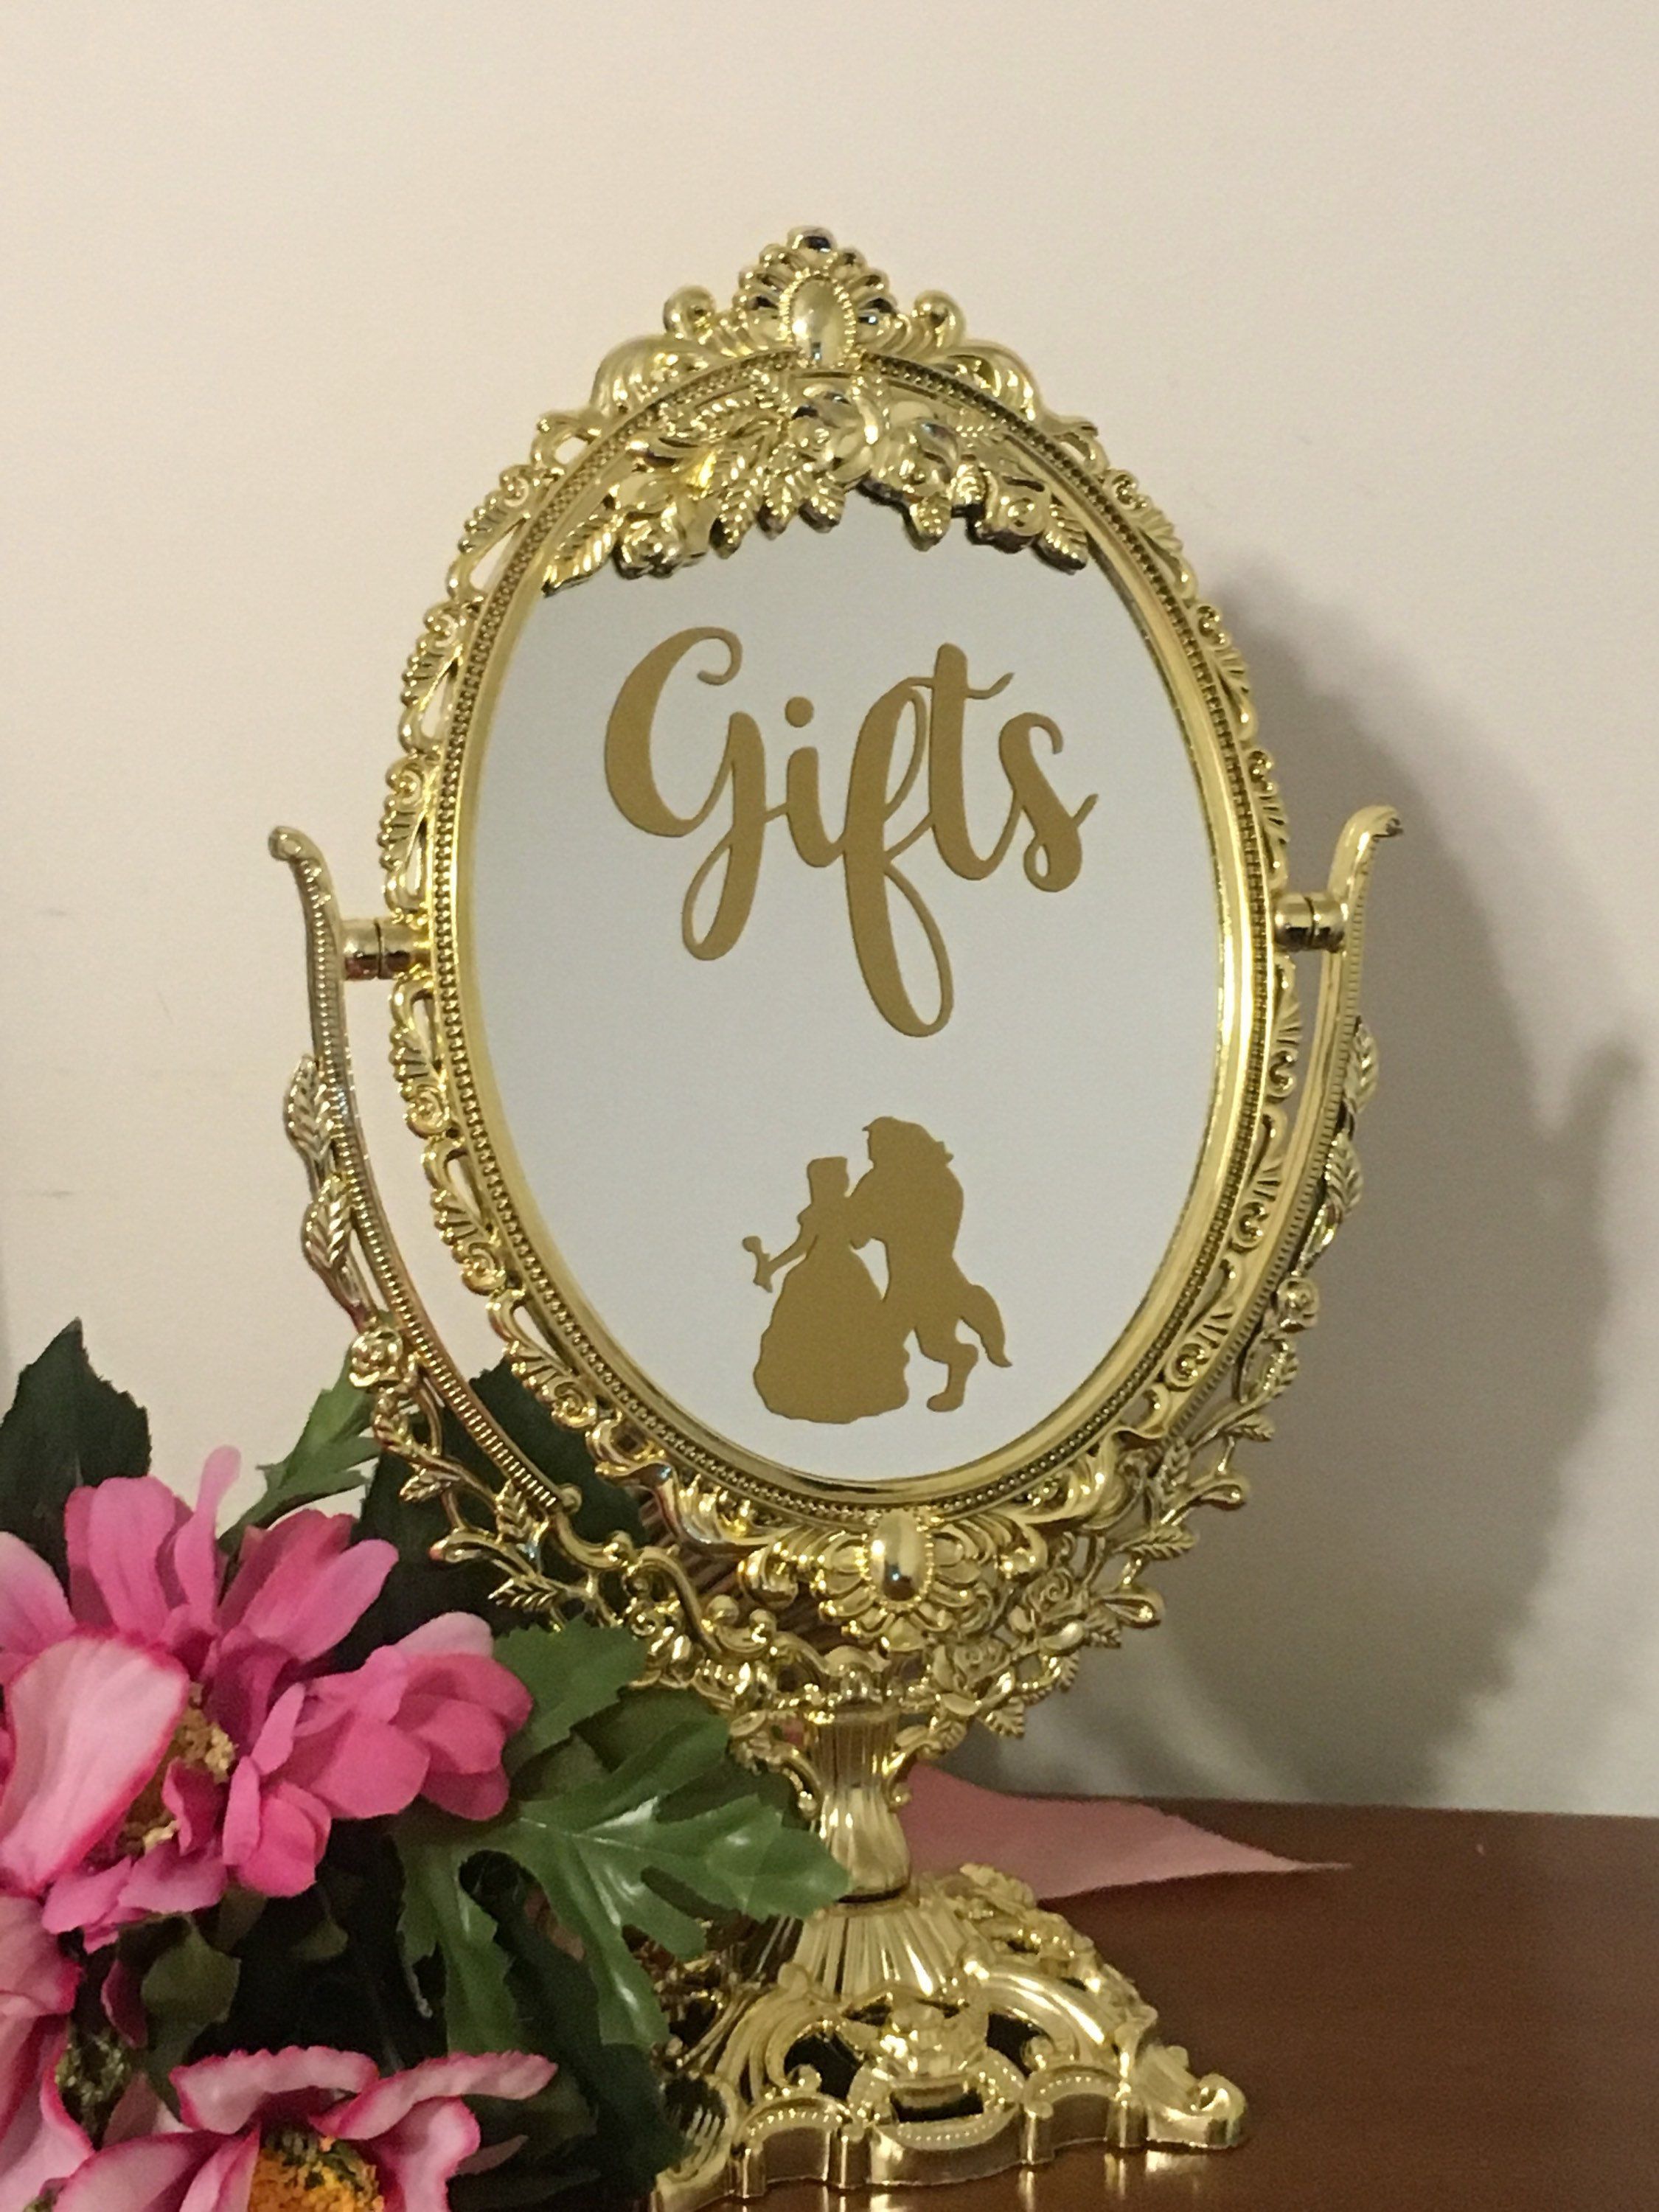 Gifts/Beauty and the Beast mirror sign/Wedding gift table sign/Princess party sign - Gifts/Beauty and the Beast mirror sign/Wedding gift table sign/Princess party sign -   18 beauty And The Beast gifts ideas